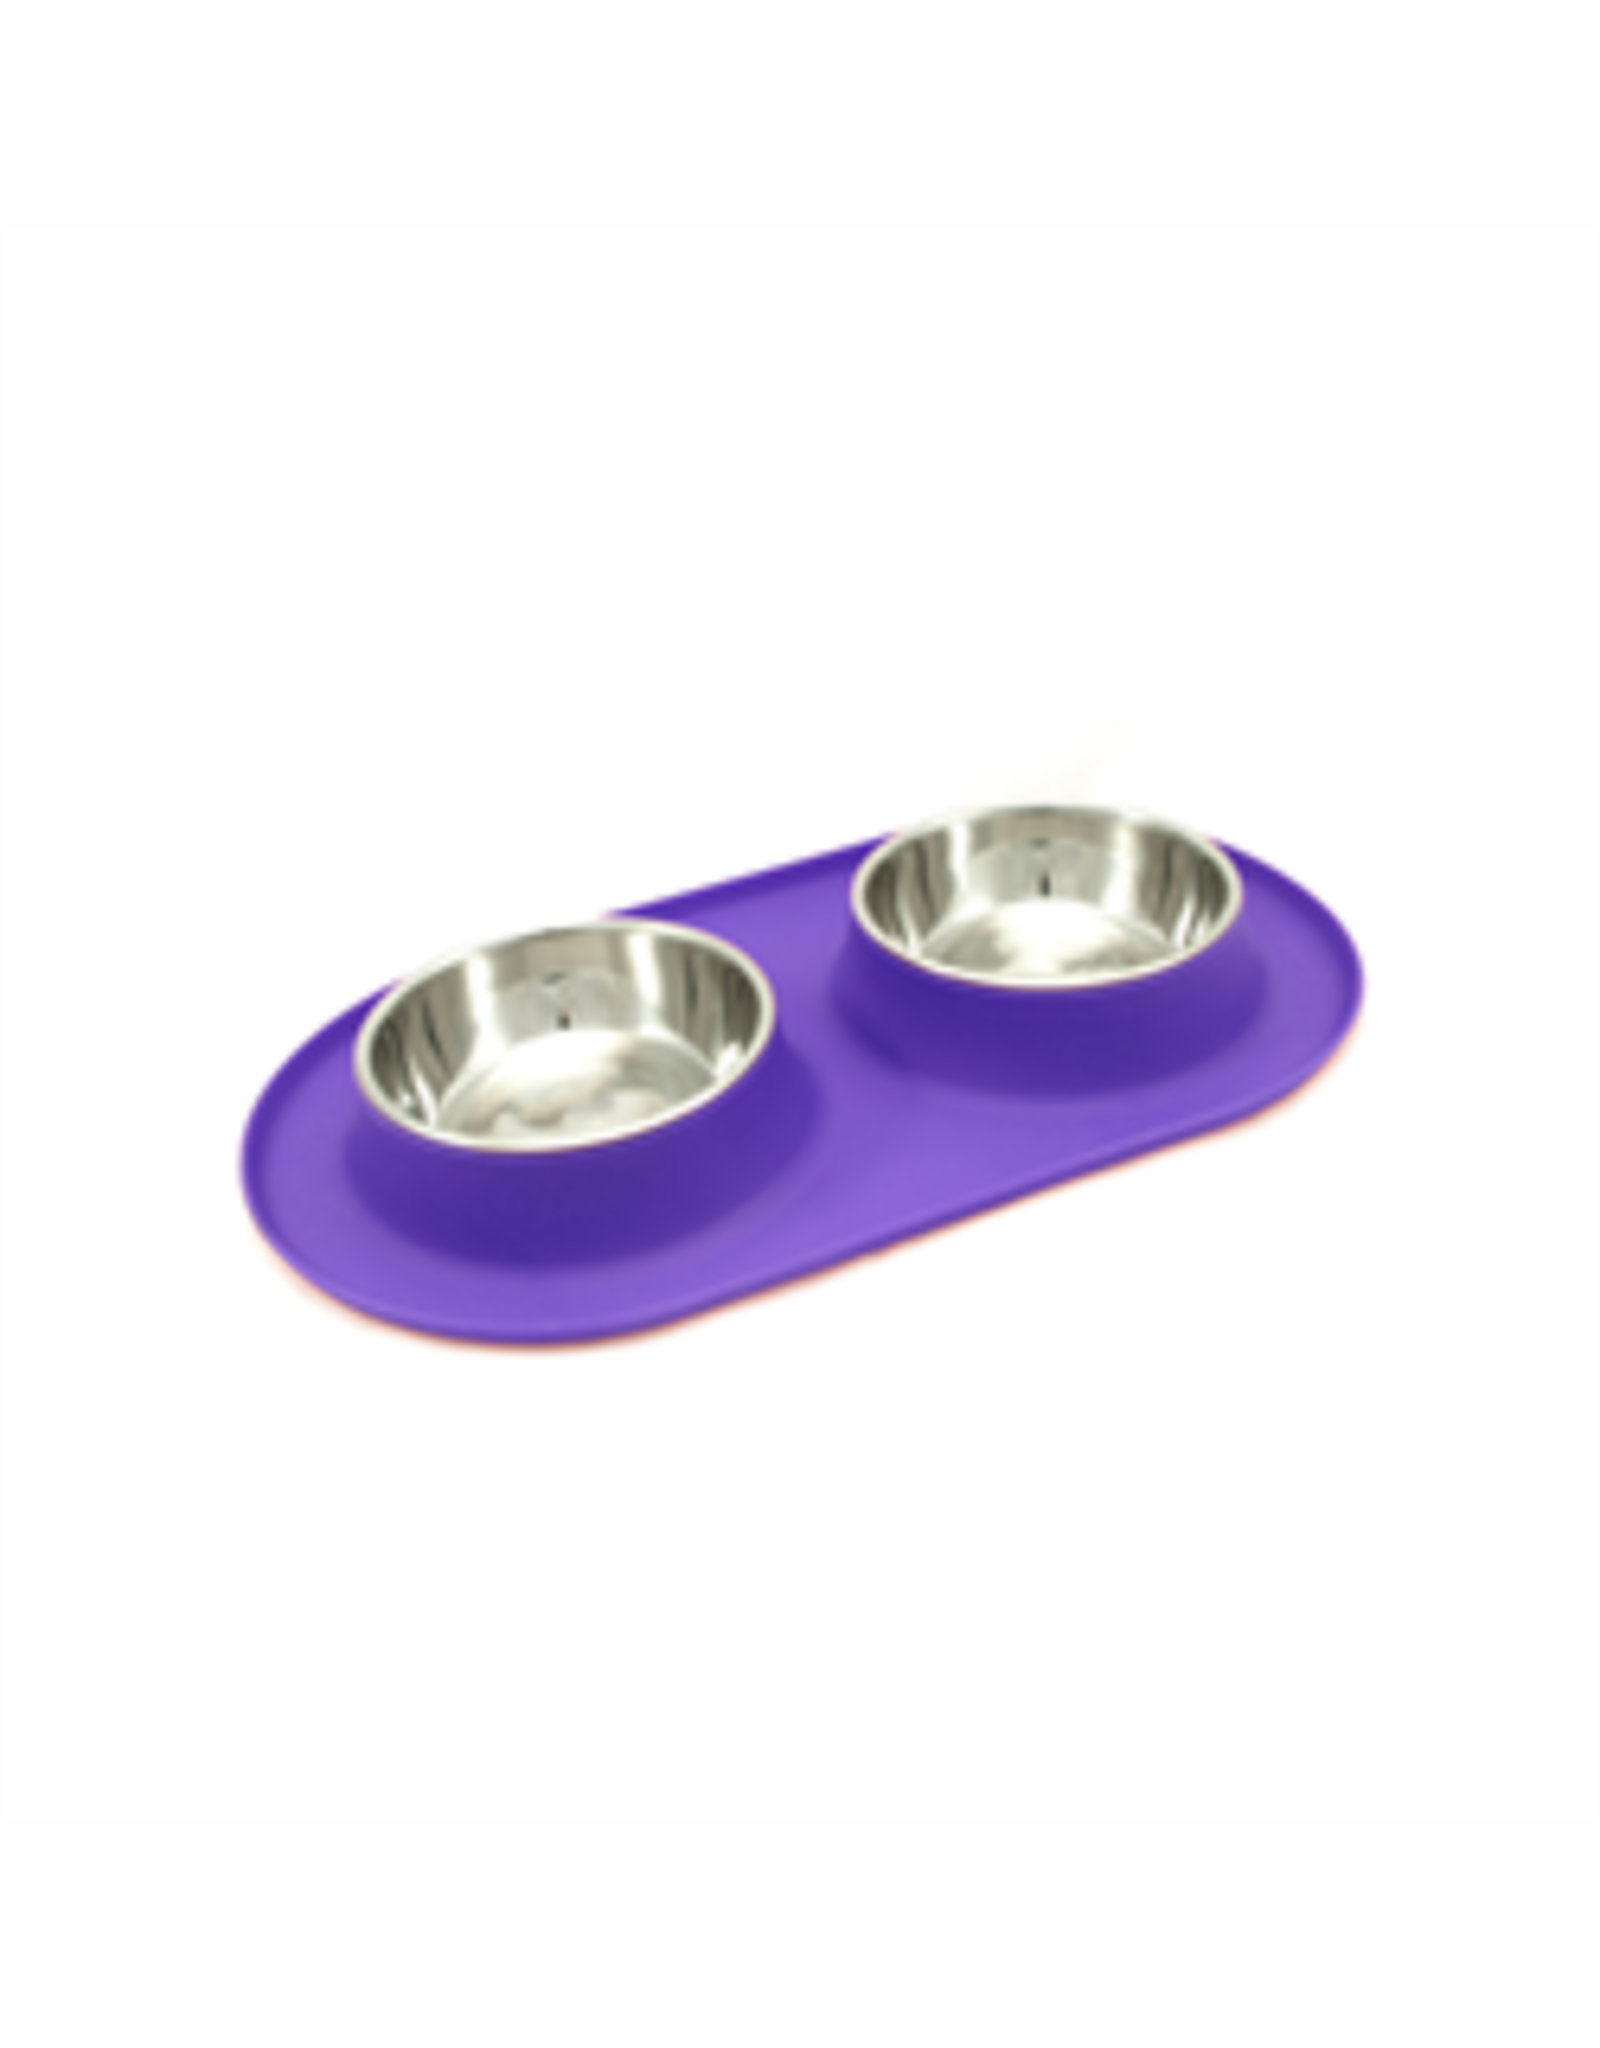 Messy Cats Double Silicone Feeder with Stainless Saucer Bowl - 1.75cups